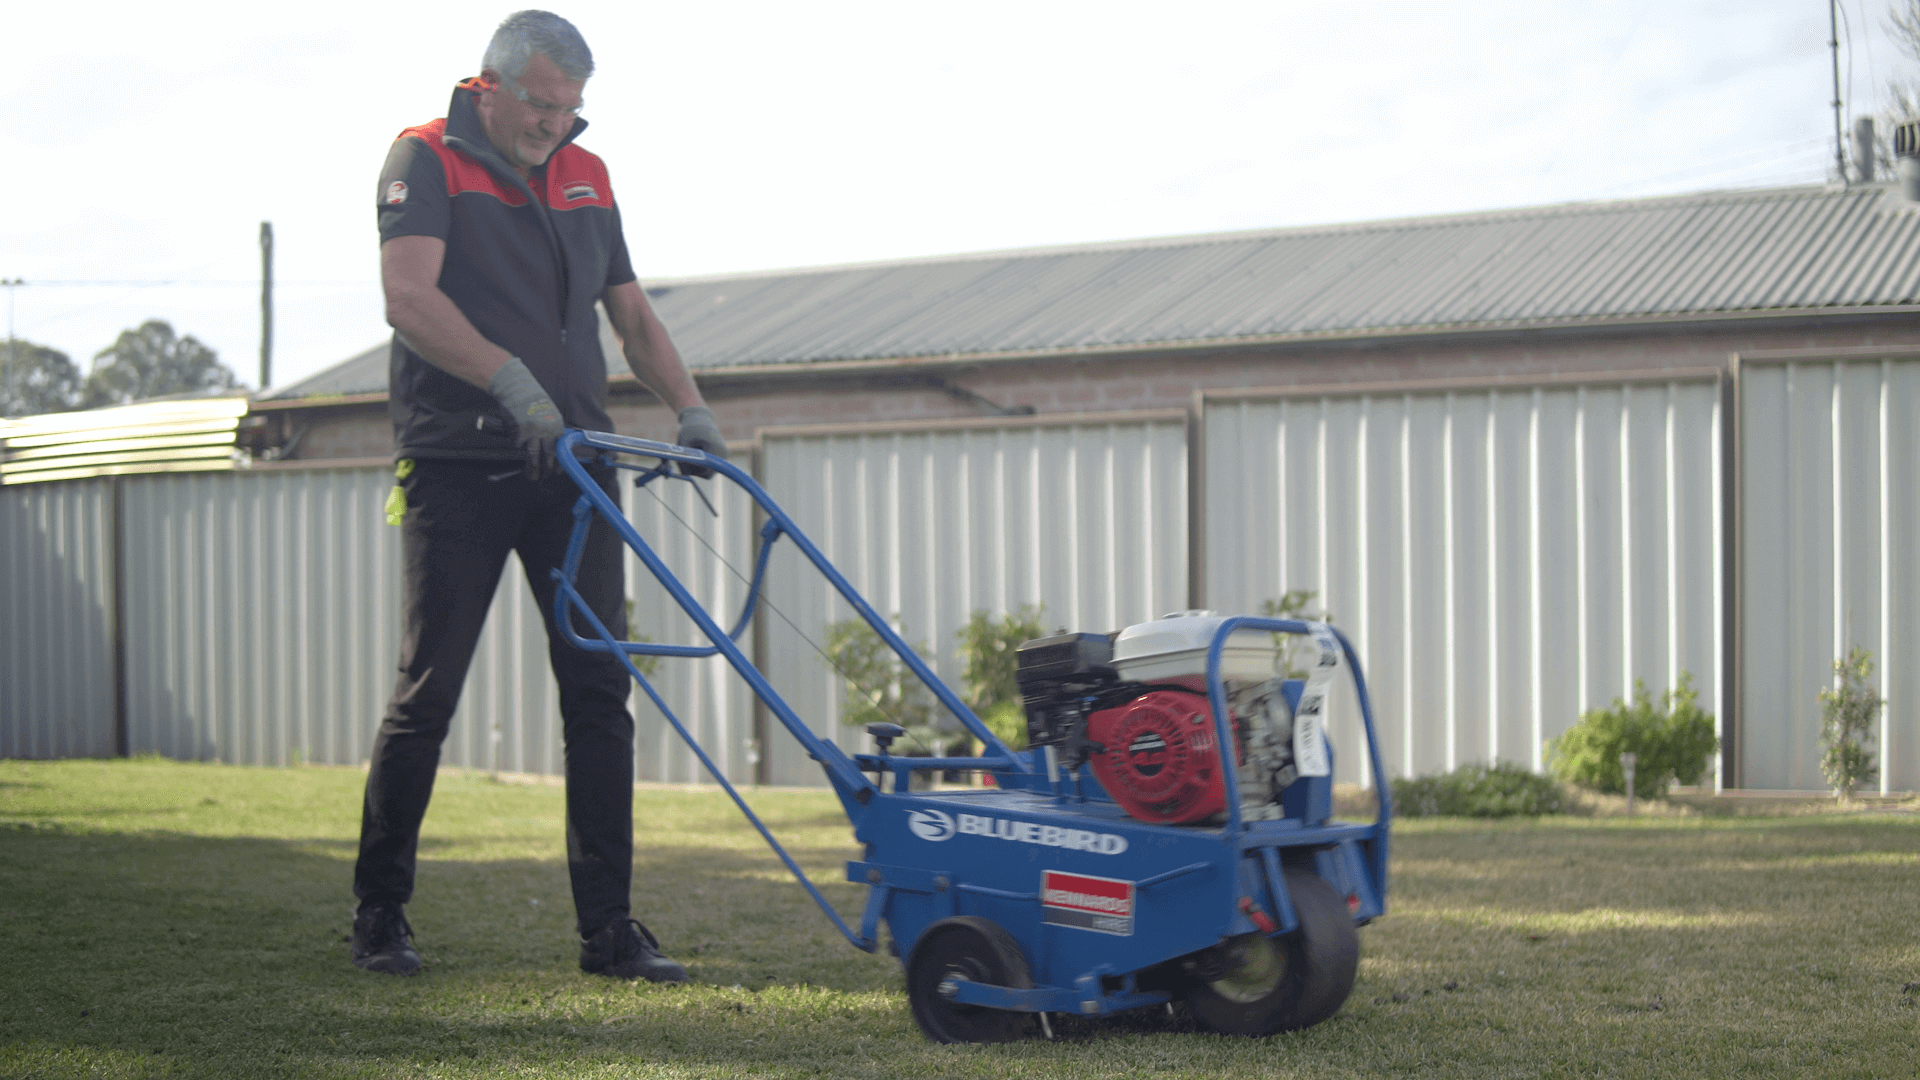 Preparing your lawn before using the Lawn Corer